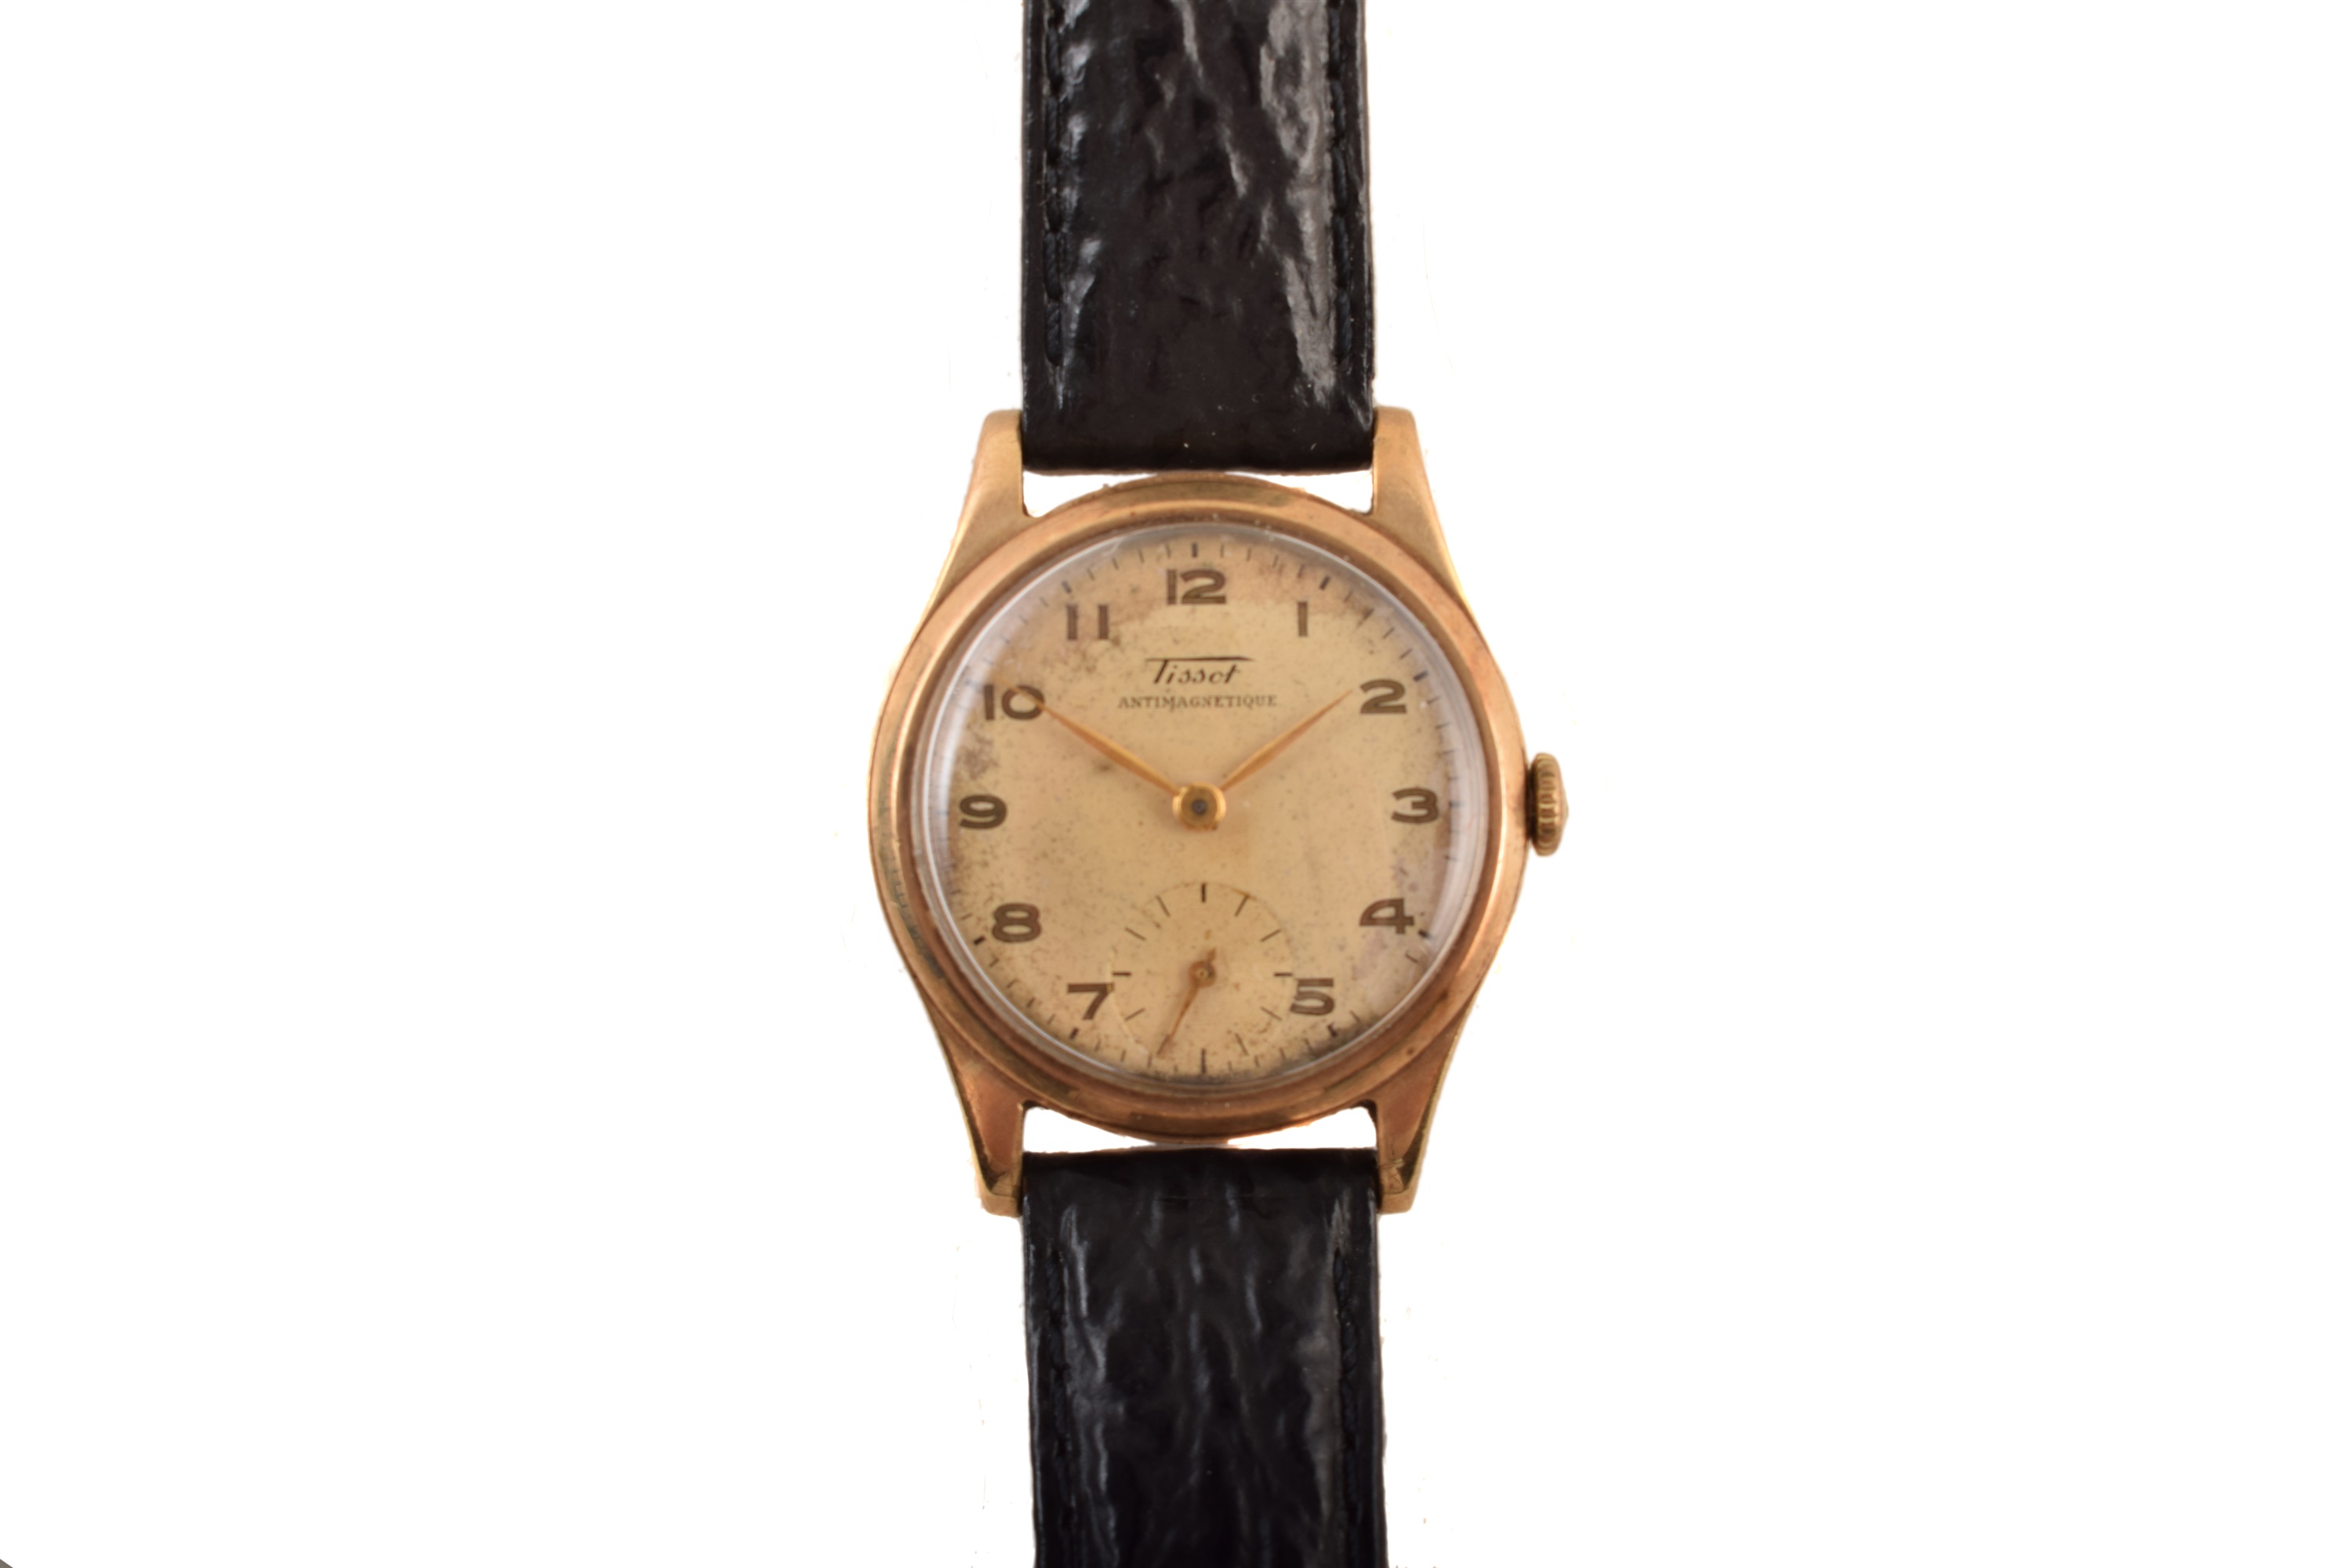 A mid 20th century 9ct gold cased Tissot Antimagnetique wristwatch, - Image 4 of 4